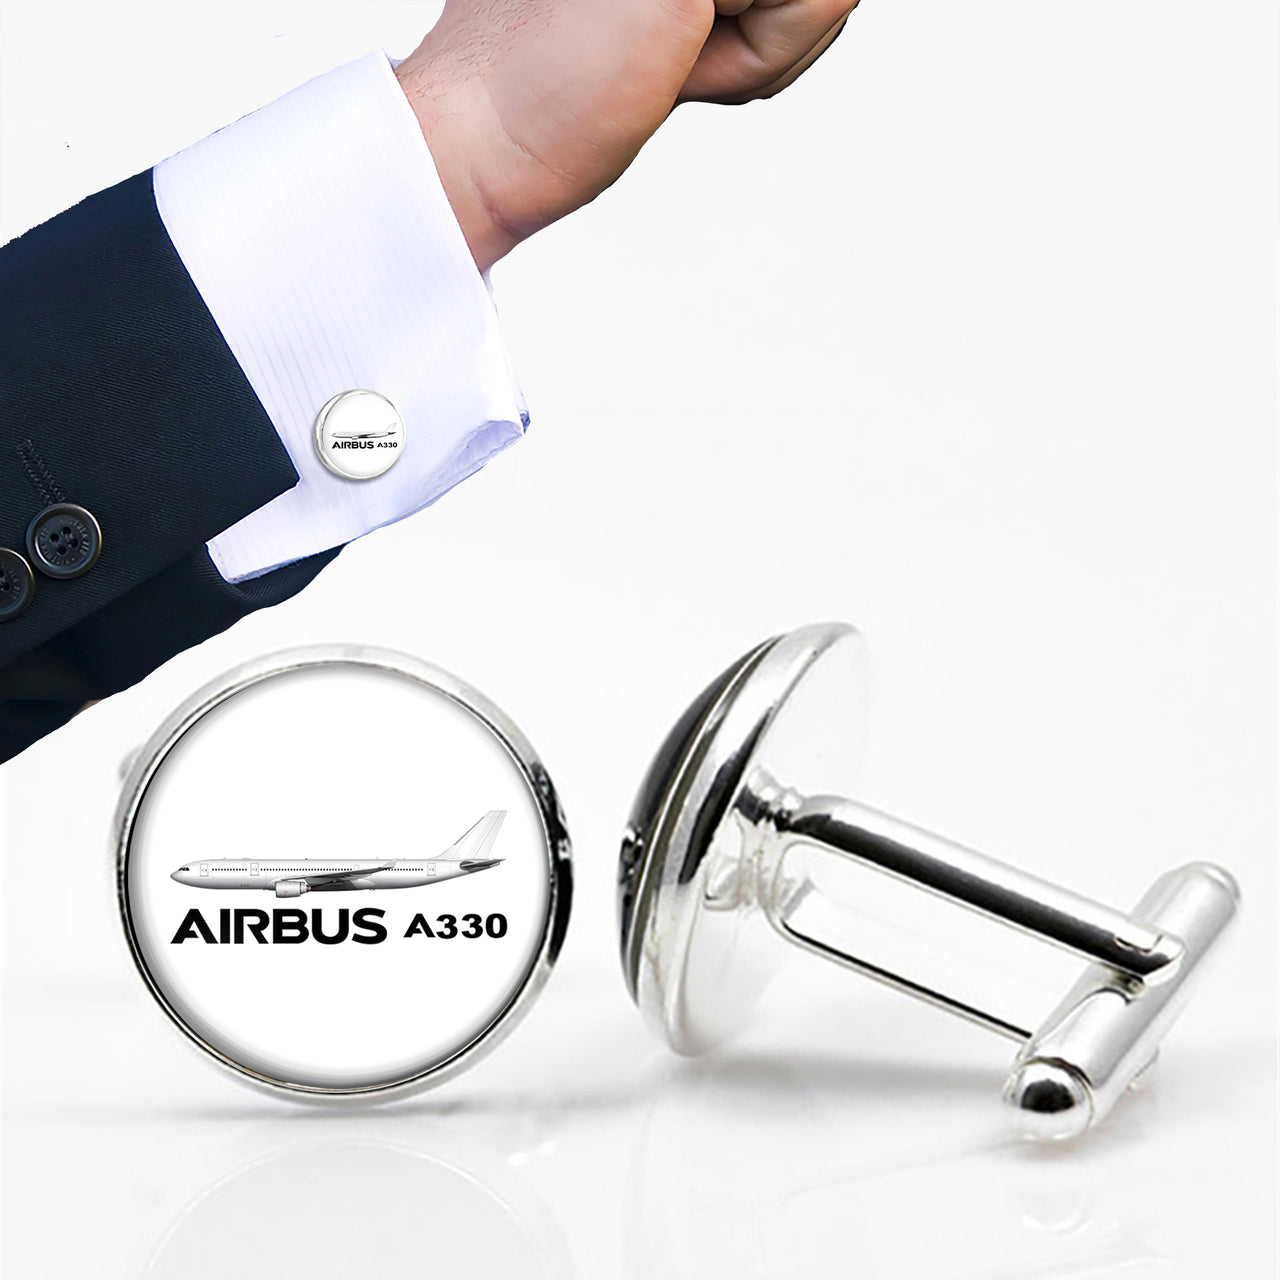 The Airbus A330 Designed Cuff Links